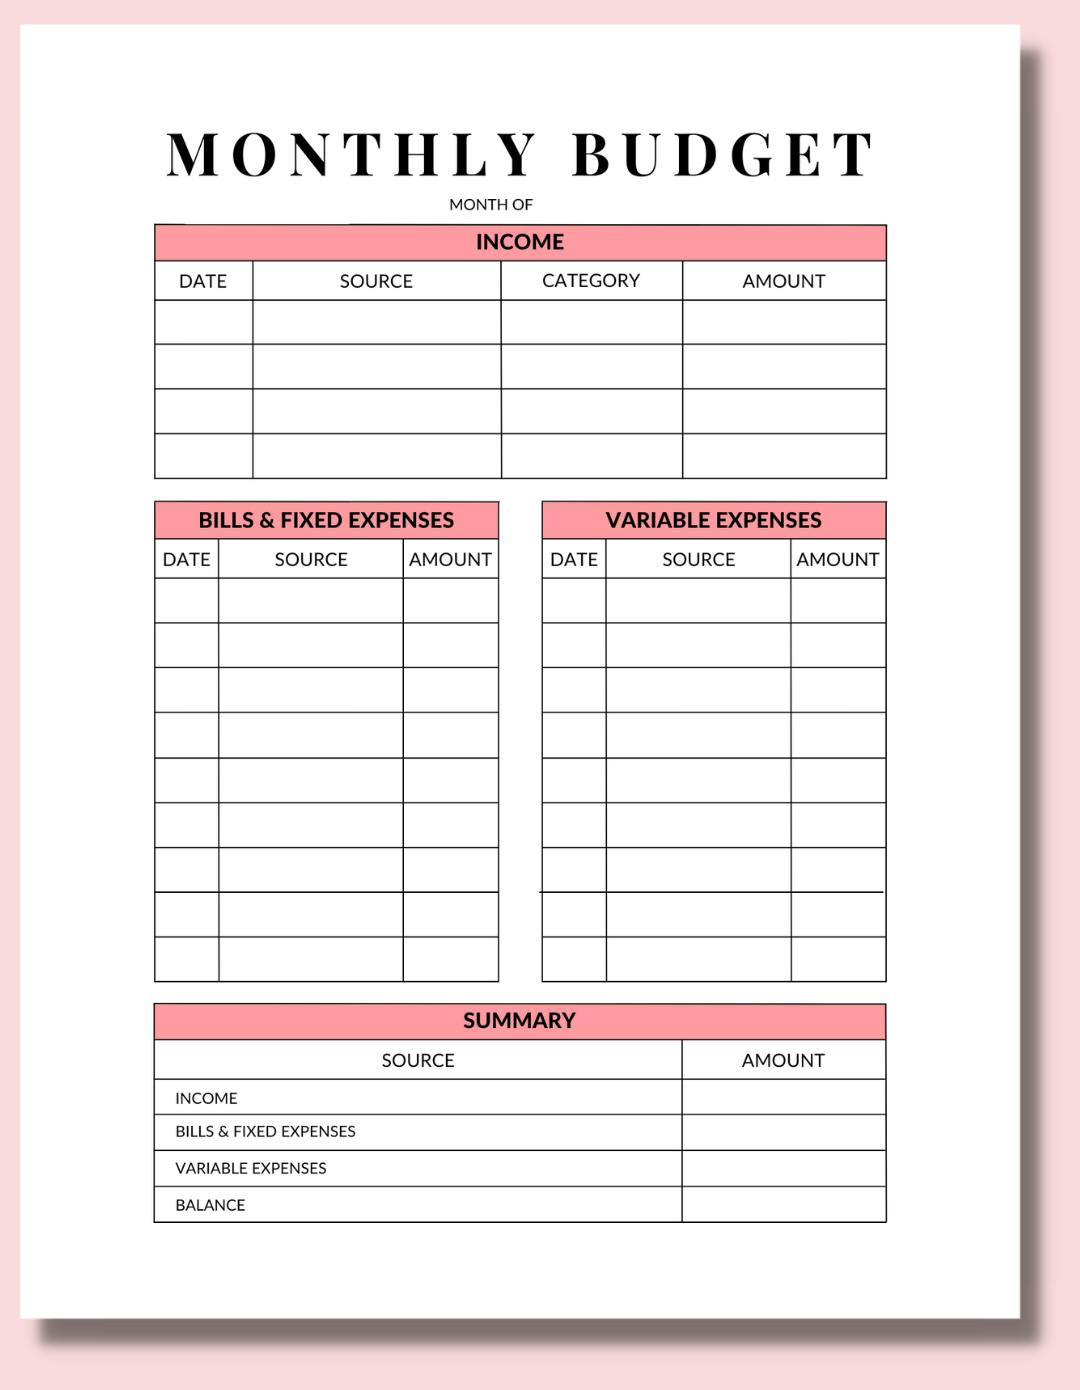 Semi Monthly Budget Template: The Key to Financial Success in 2021